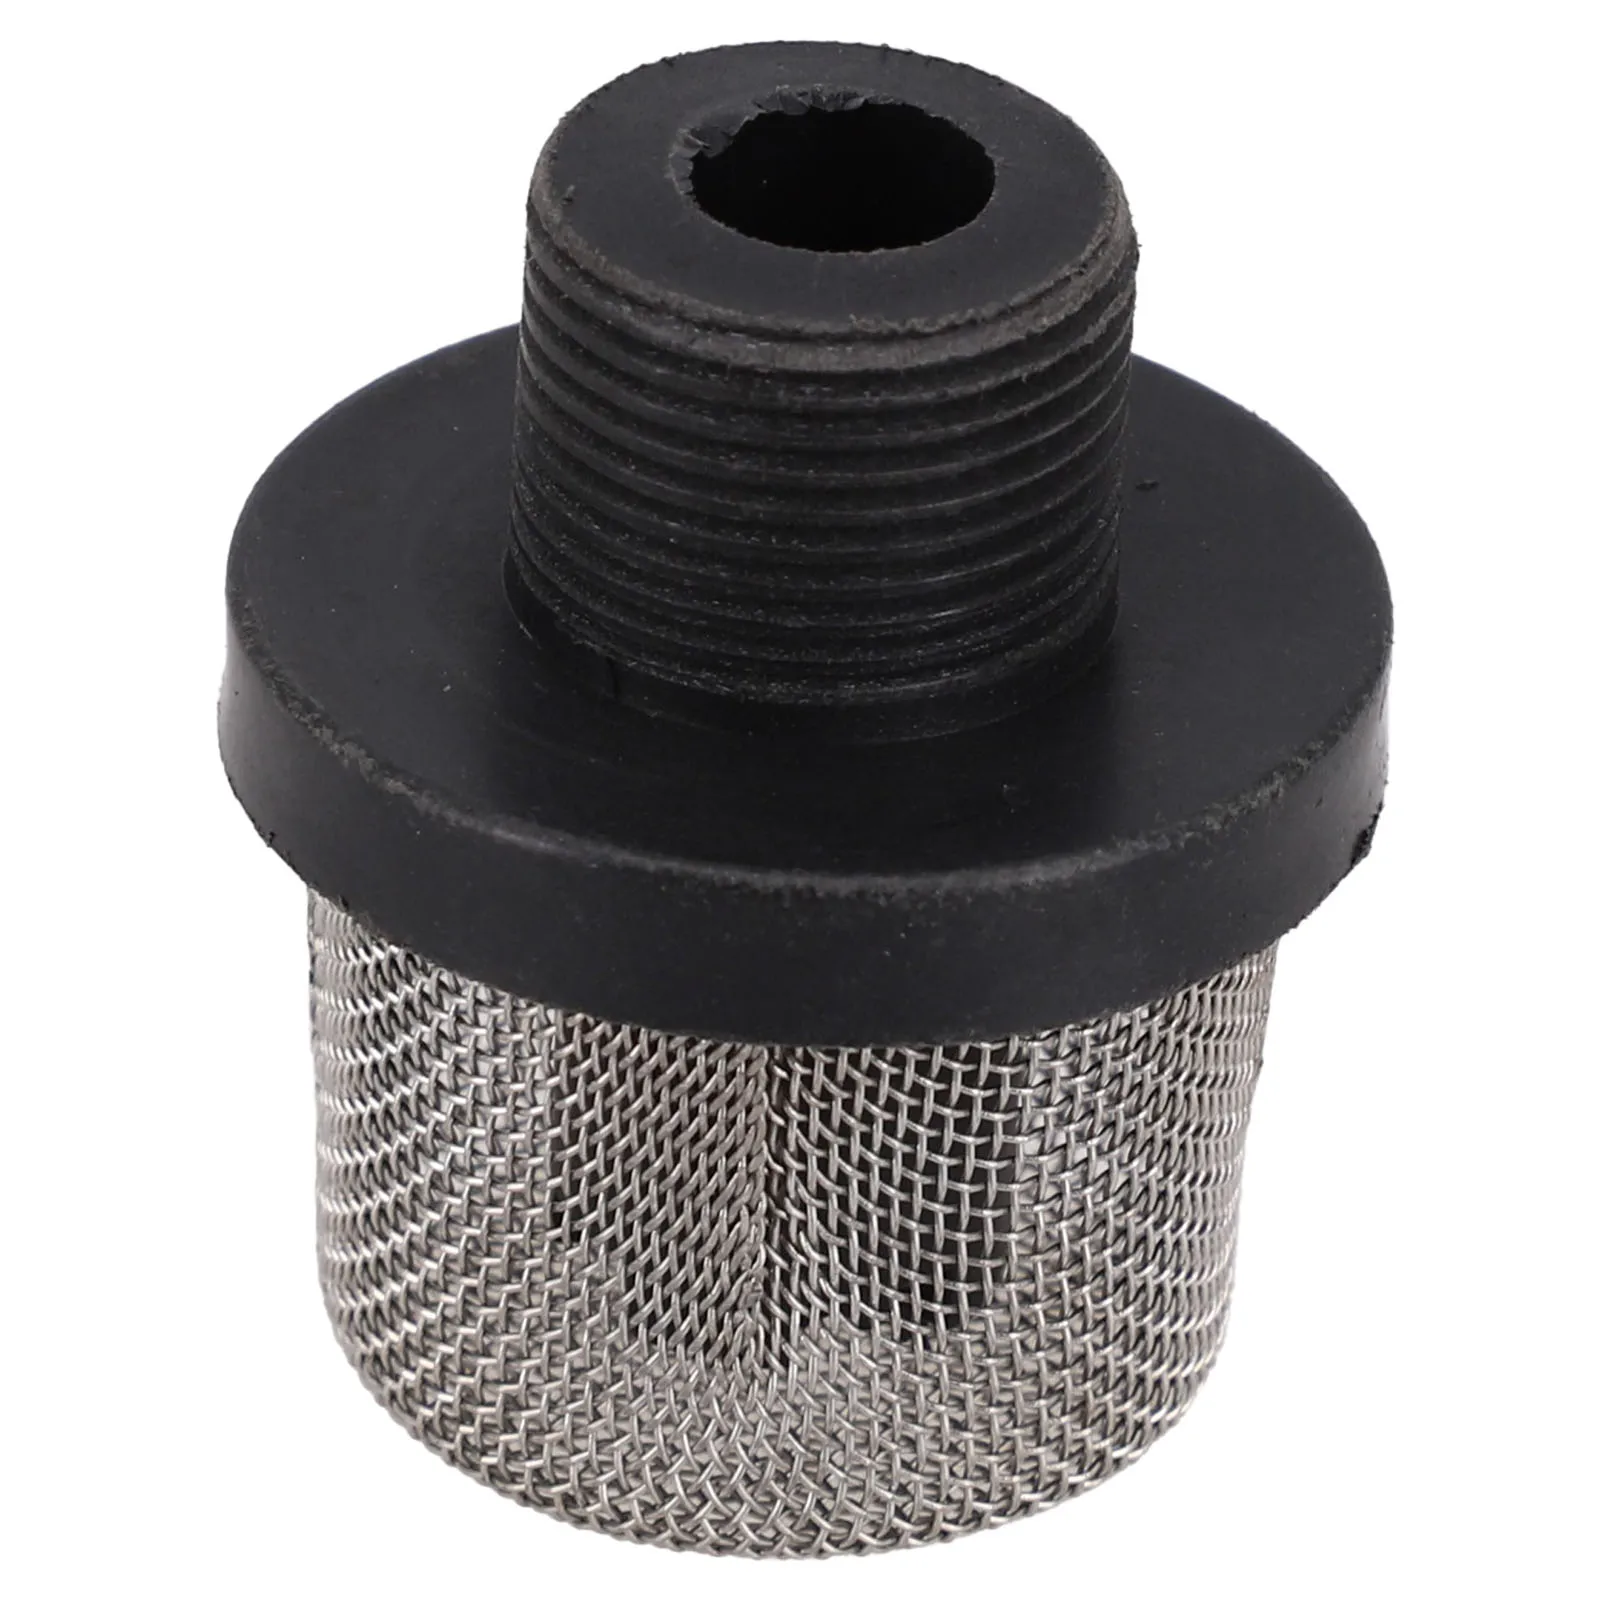 Eco friendly Mesh Filter for Suction Pipe  Lightweight Design  Protects Pump from Contaminants  288716 Part Number